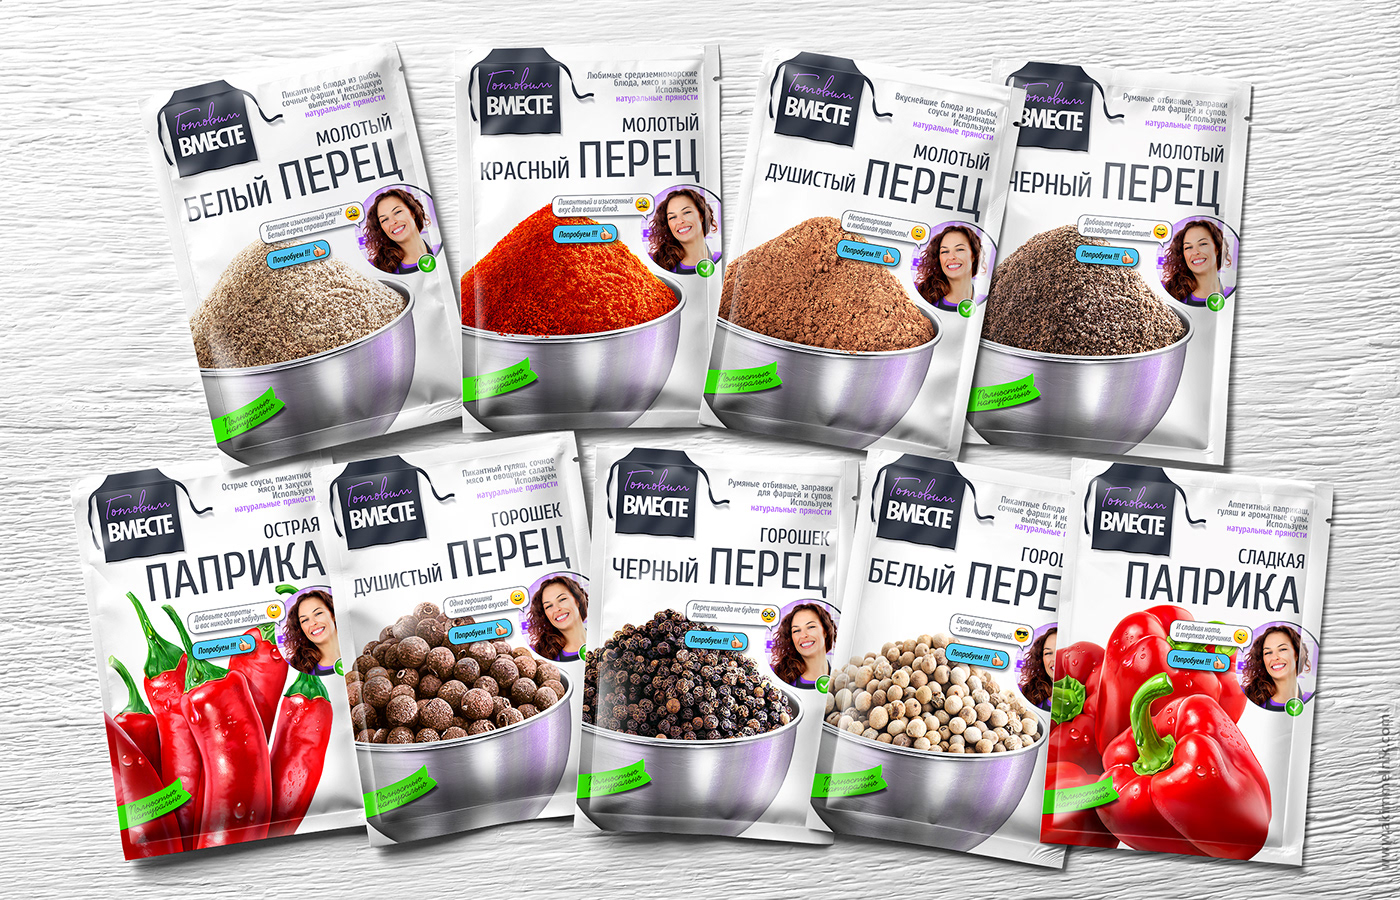 Pepper packages